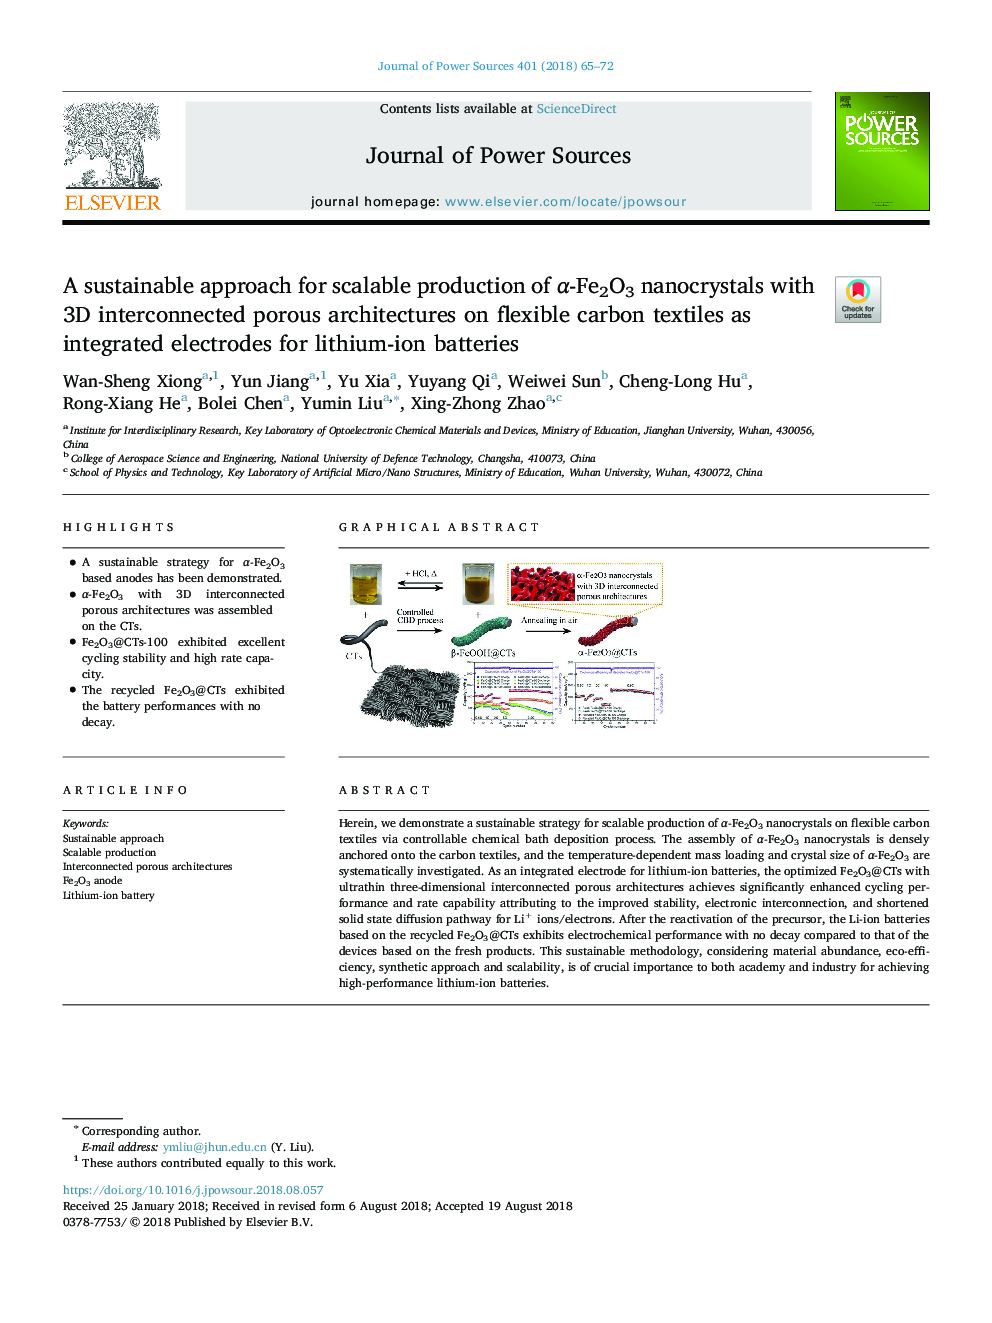 A sustainable approach for scalable production of Î±-Fe2O3 nanocrystals with 3D interconnected porous architectures on flexible carbon textiles as integrated electrodes for lithium-ion batteries